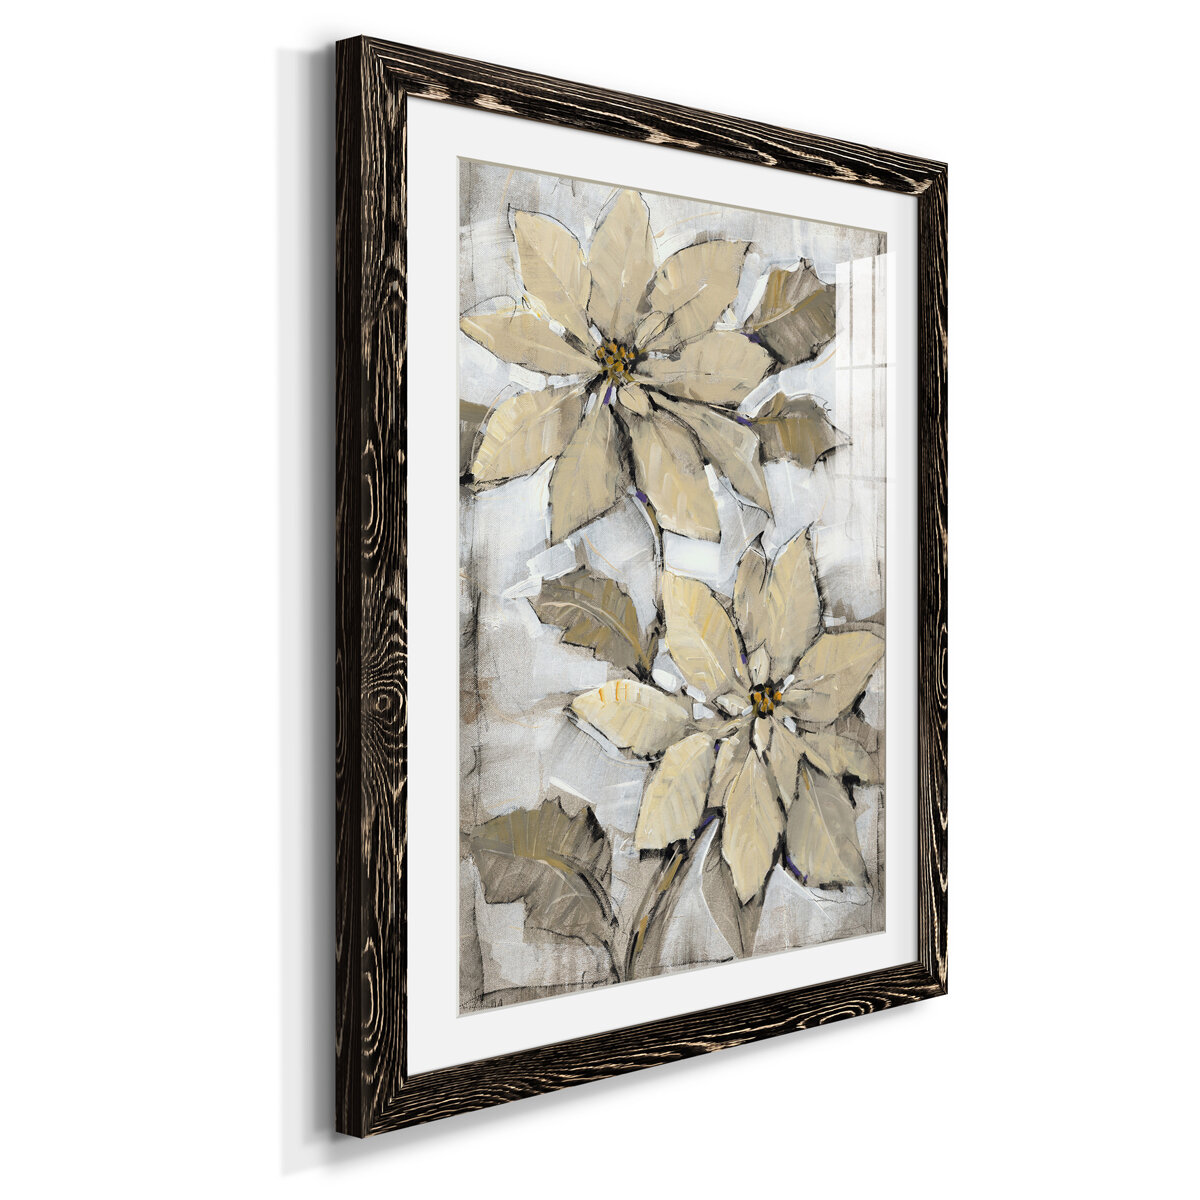 Red Barrel Studio® Poinsettia Study II - Picture Frame Painting | Wayfair